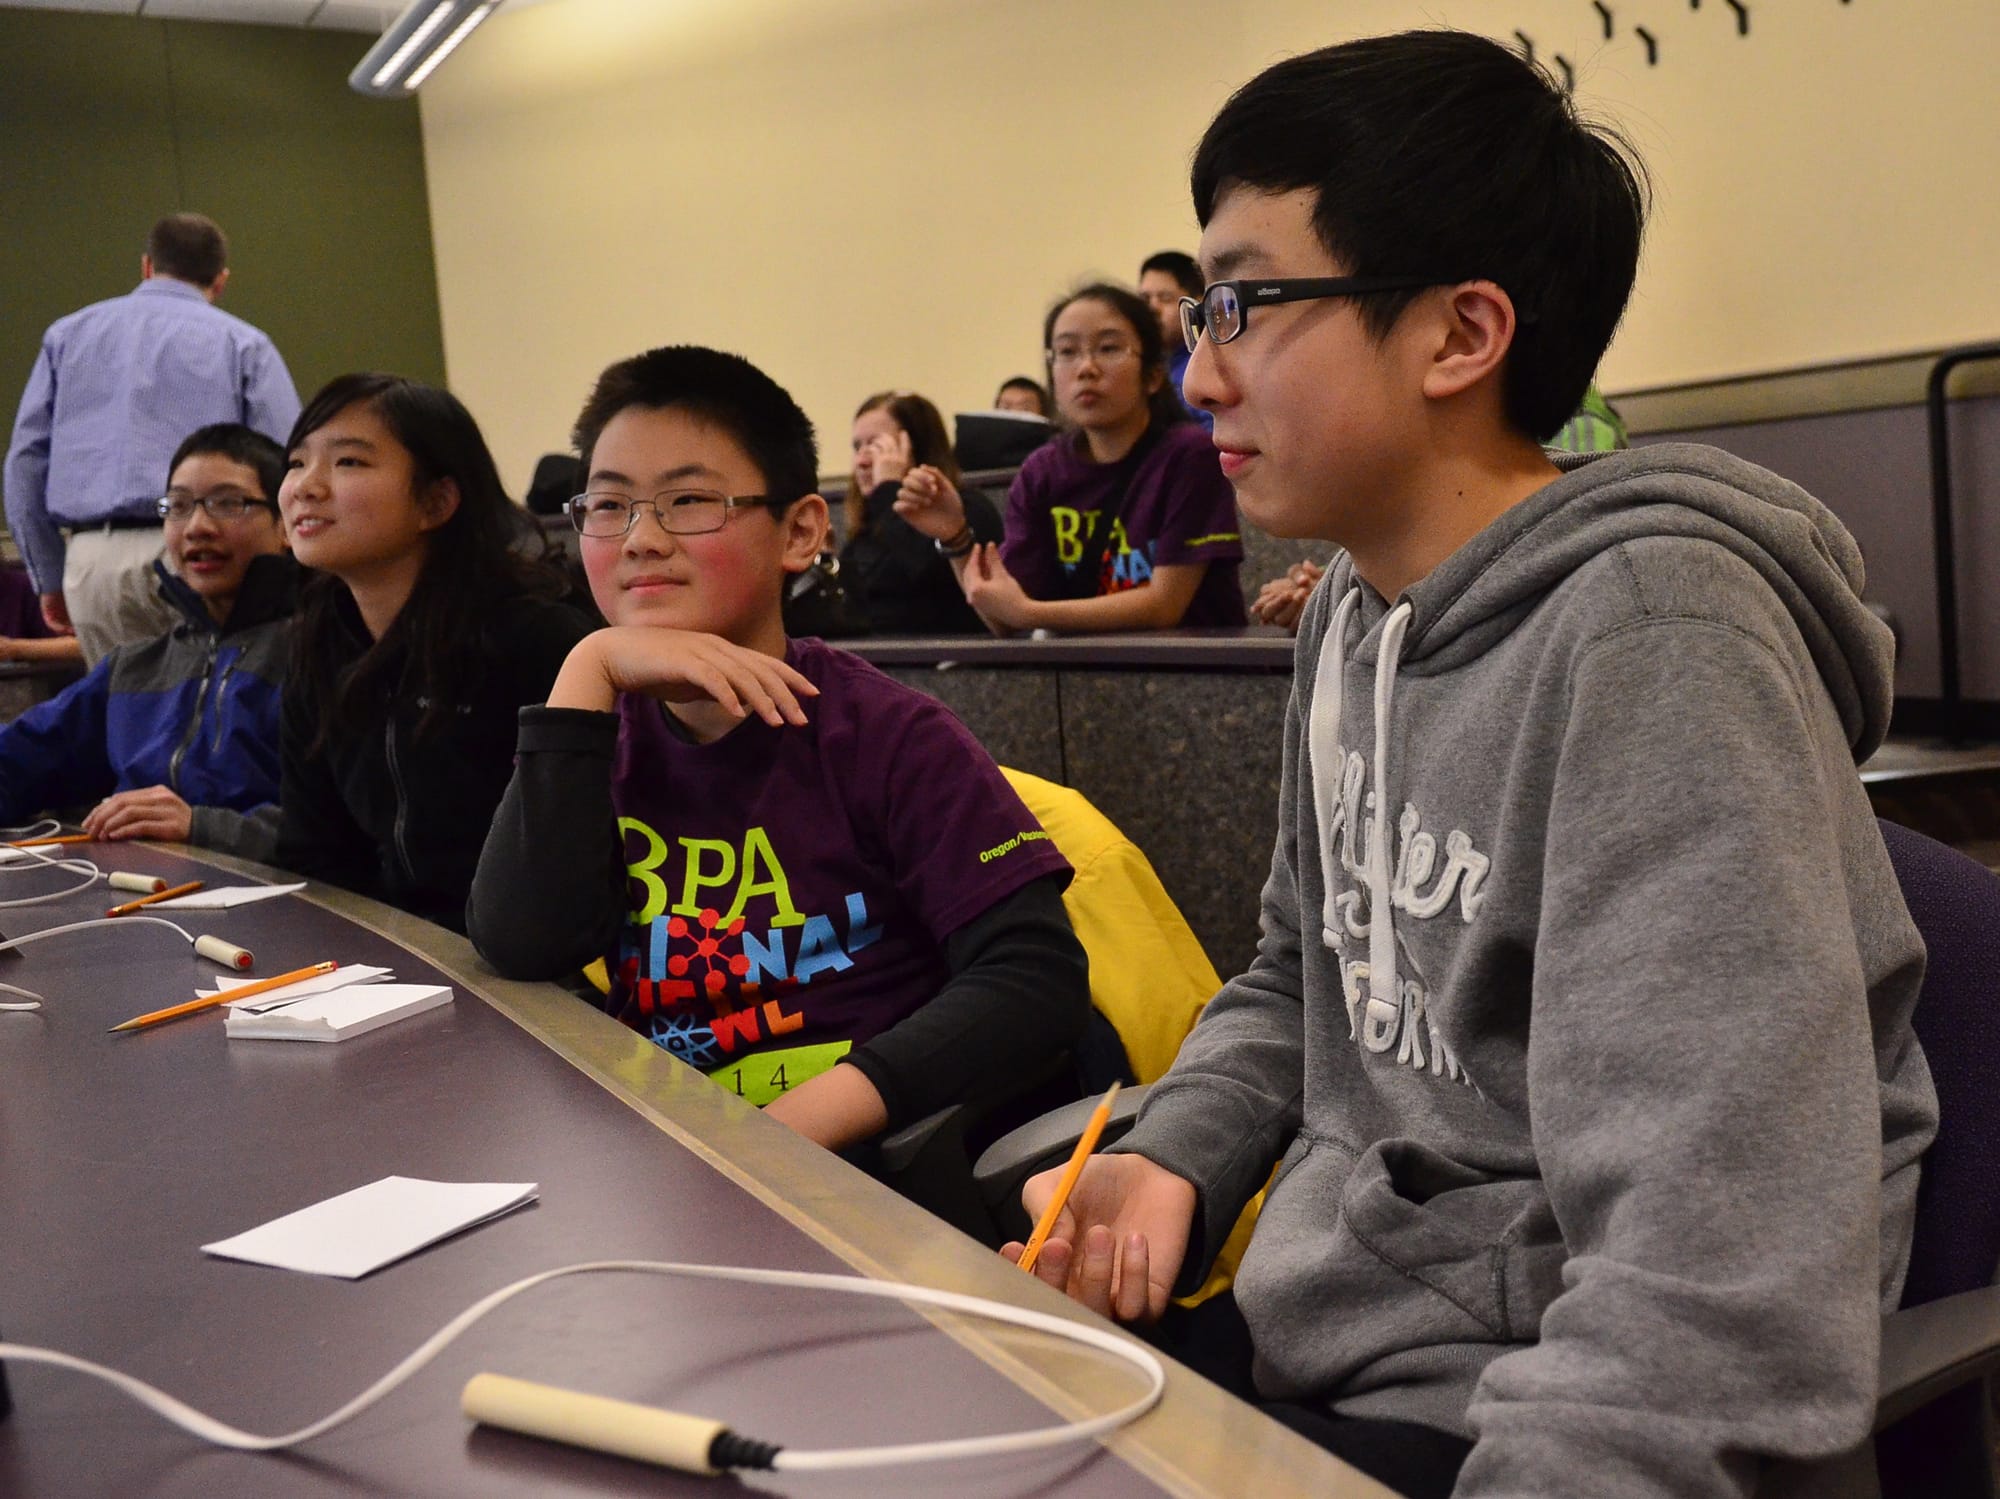 From left, Edmond Hsu, Sabrina Wang, Phillip Meng and Enoch Tsai of Shahala Middle School in Vancouver get ready for a round Saturday during the middle school competition for the BPA Regional Science Bowl at the University of Portland.